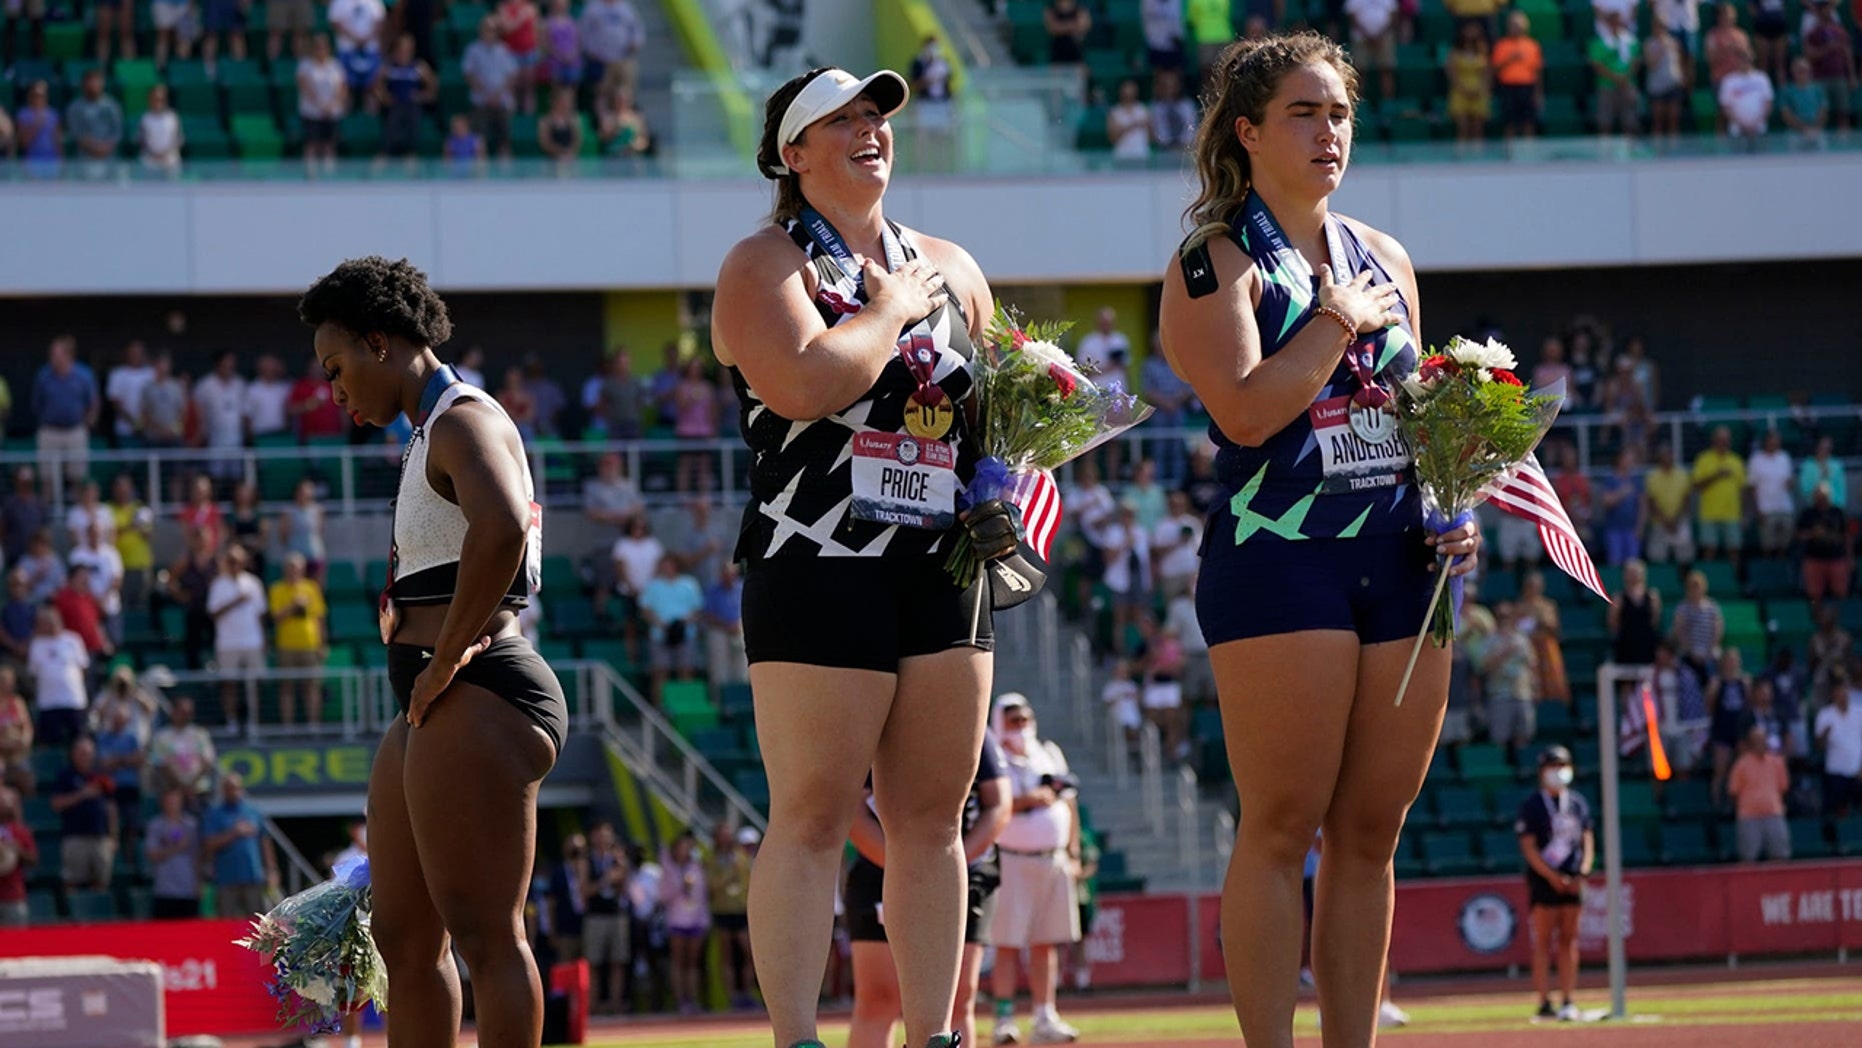 Gwendolyn Berry, left, looks away as DeAnna Price and Brooke Andersen stand for the national anthem after the finals of the women's hammer throw at the U.S. Olympic Track and Field Trials Saturday, June 26, 2021, in Eugene, Ore. Price won, Andersen was se